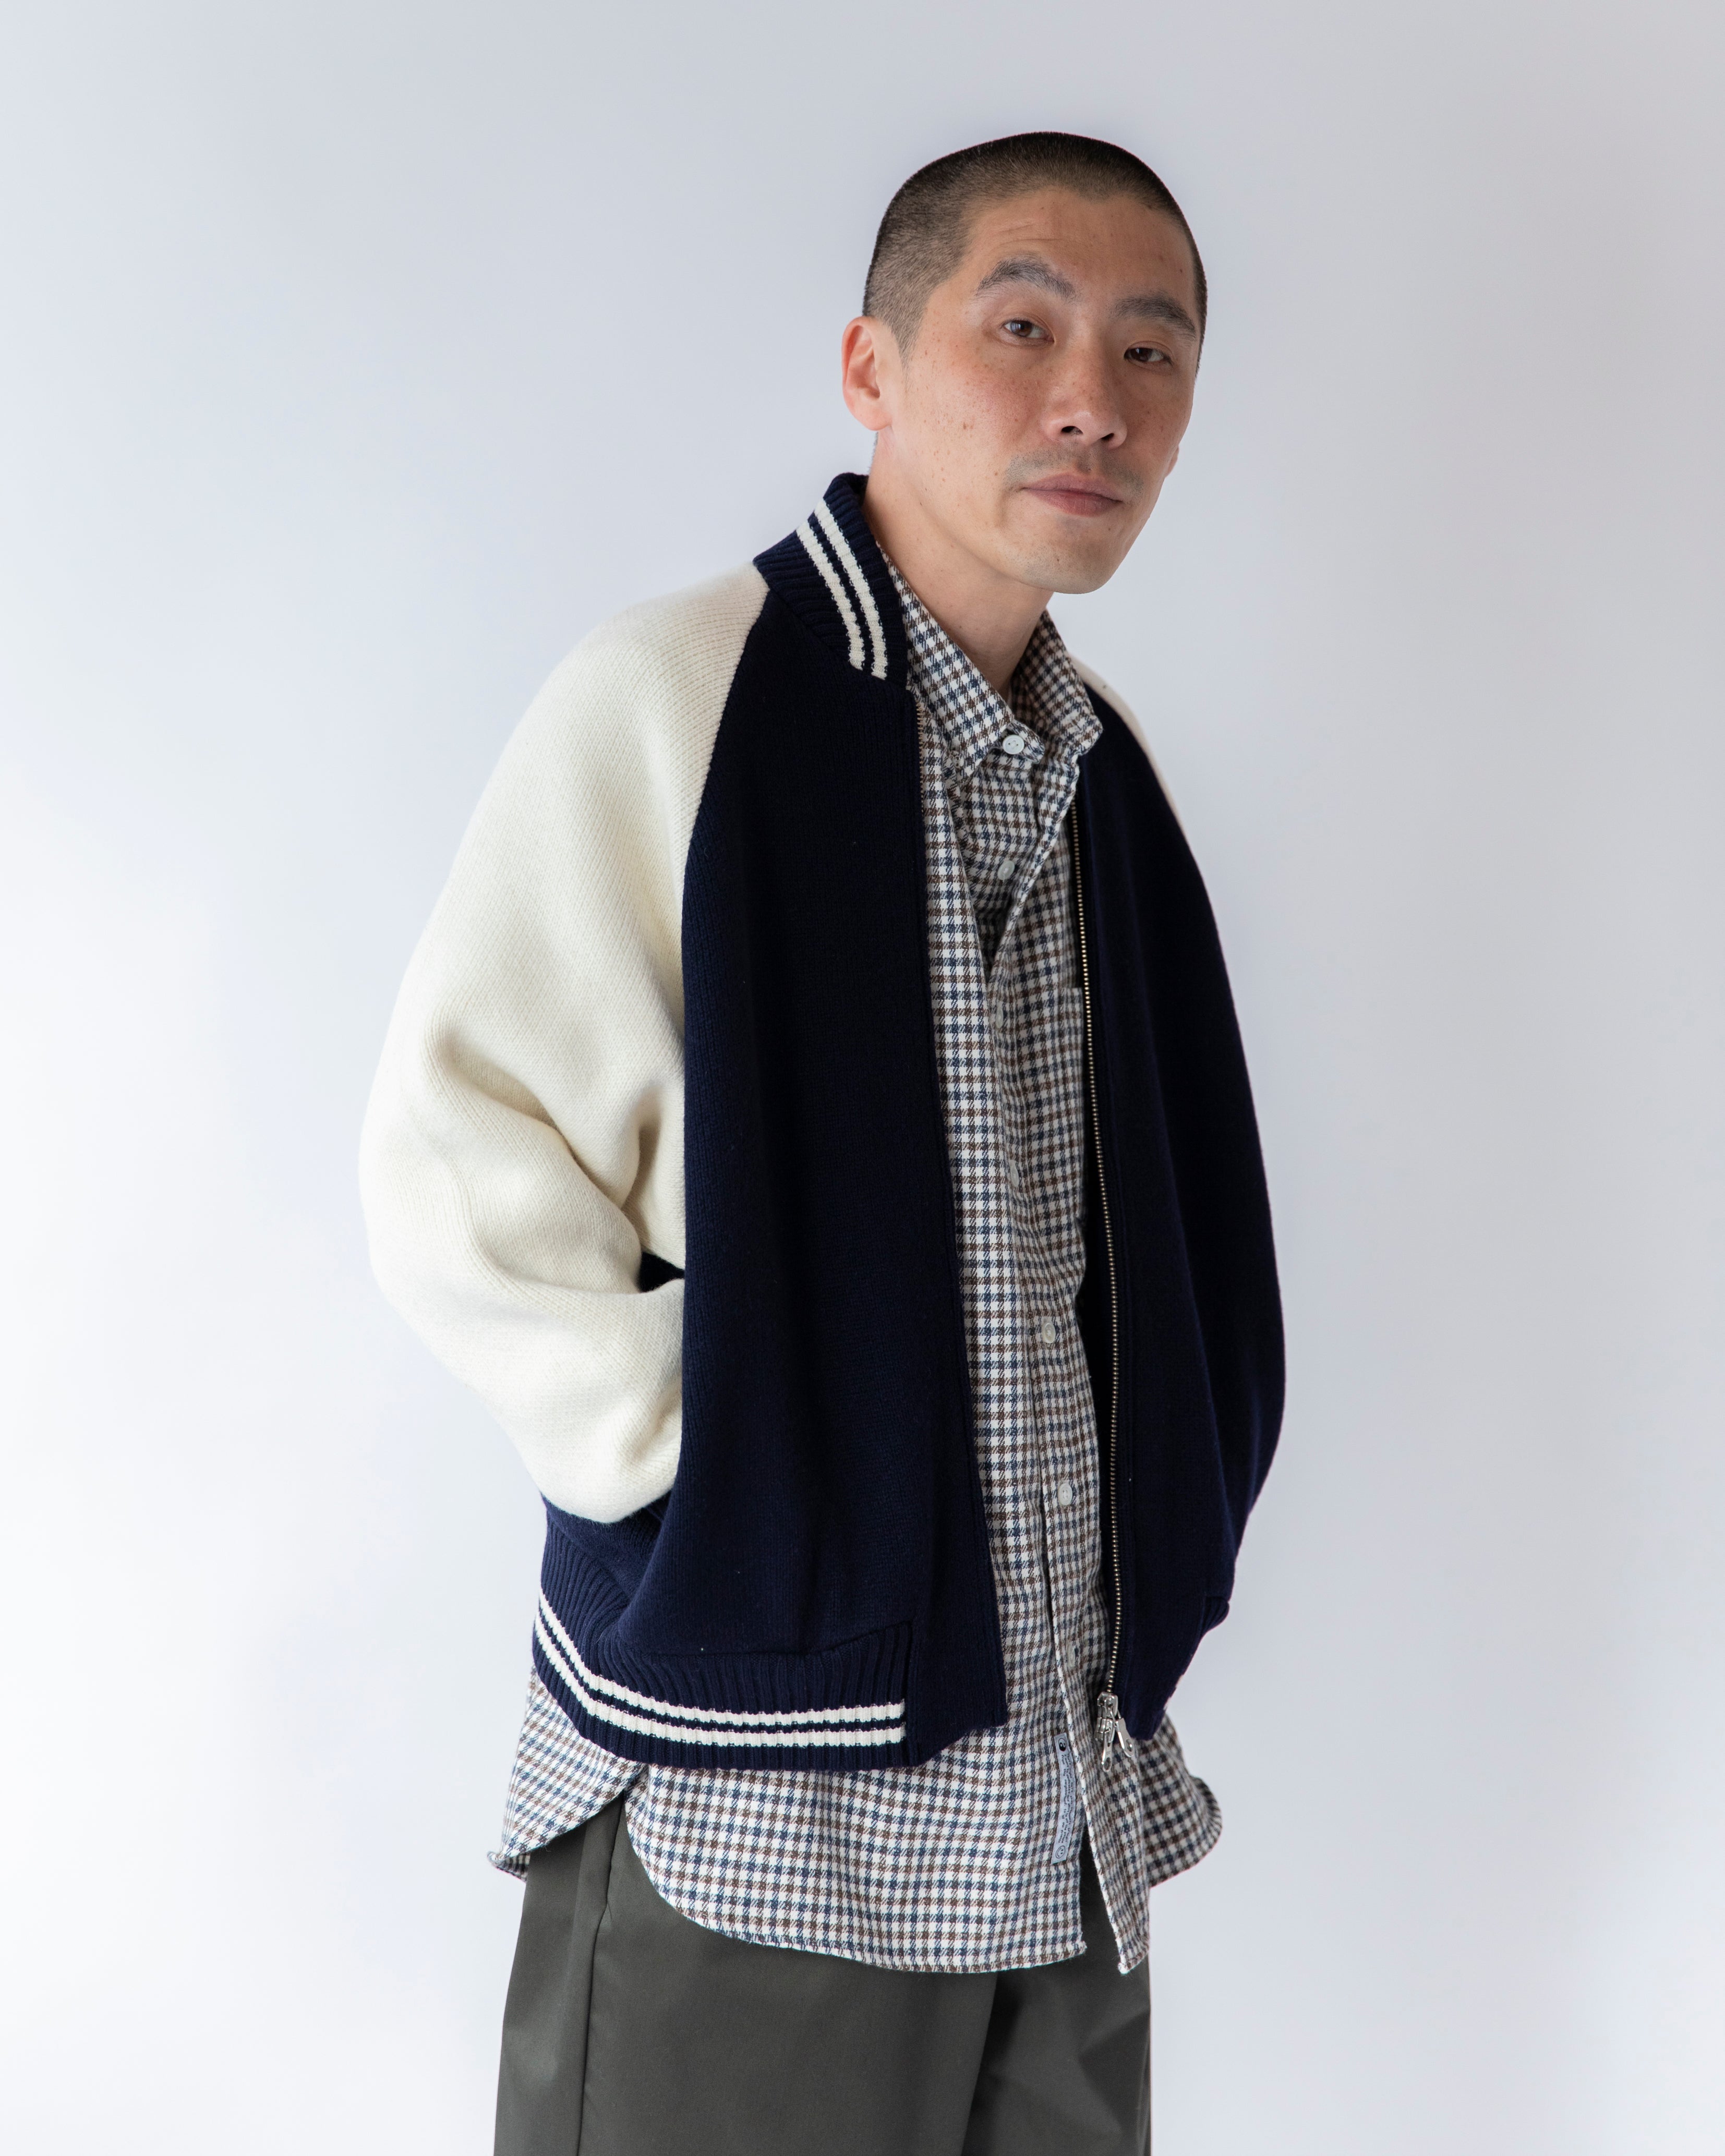 Name: KNITED  VARCITY JACKET | Color:BORDEAUX/NAVY | Size:M/L 【CITYLIGHTS PRODUCTS_シティライツプロダクツ】